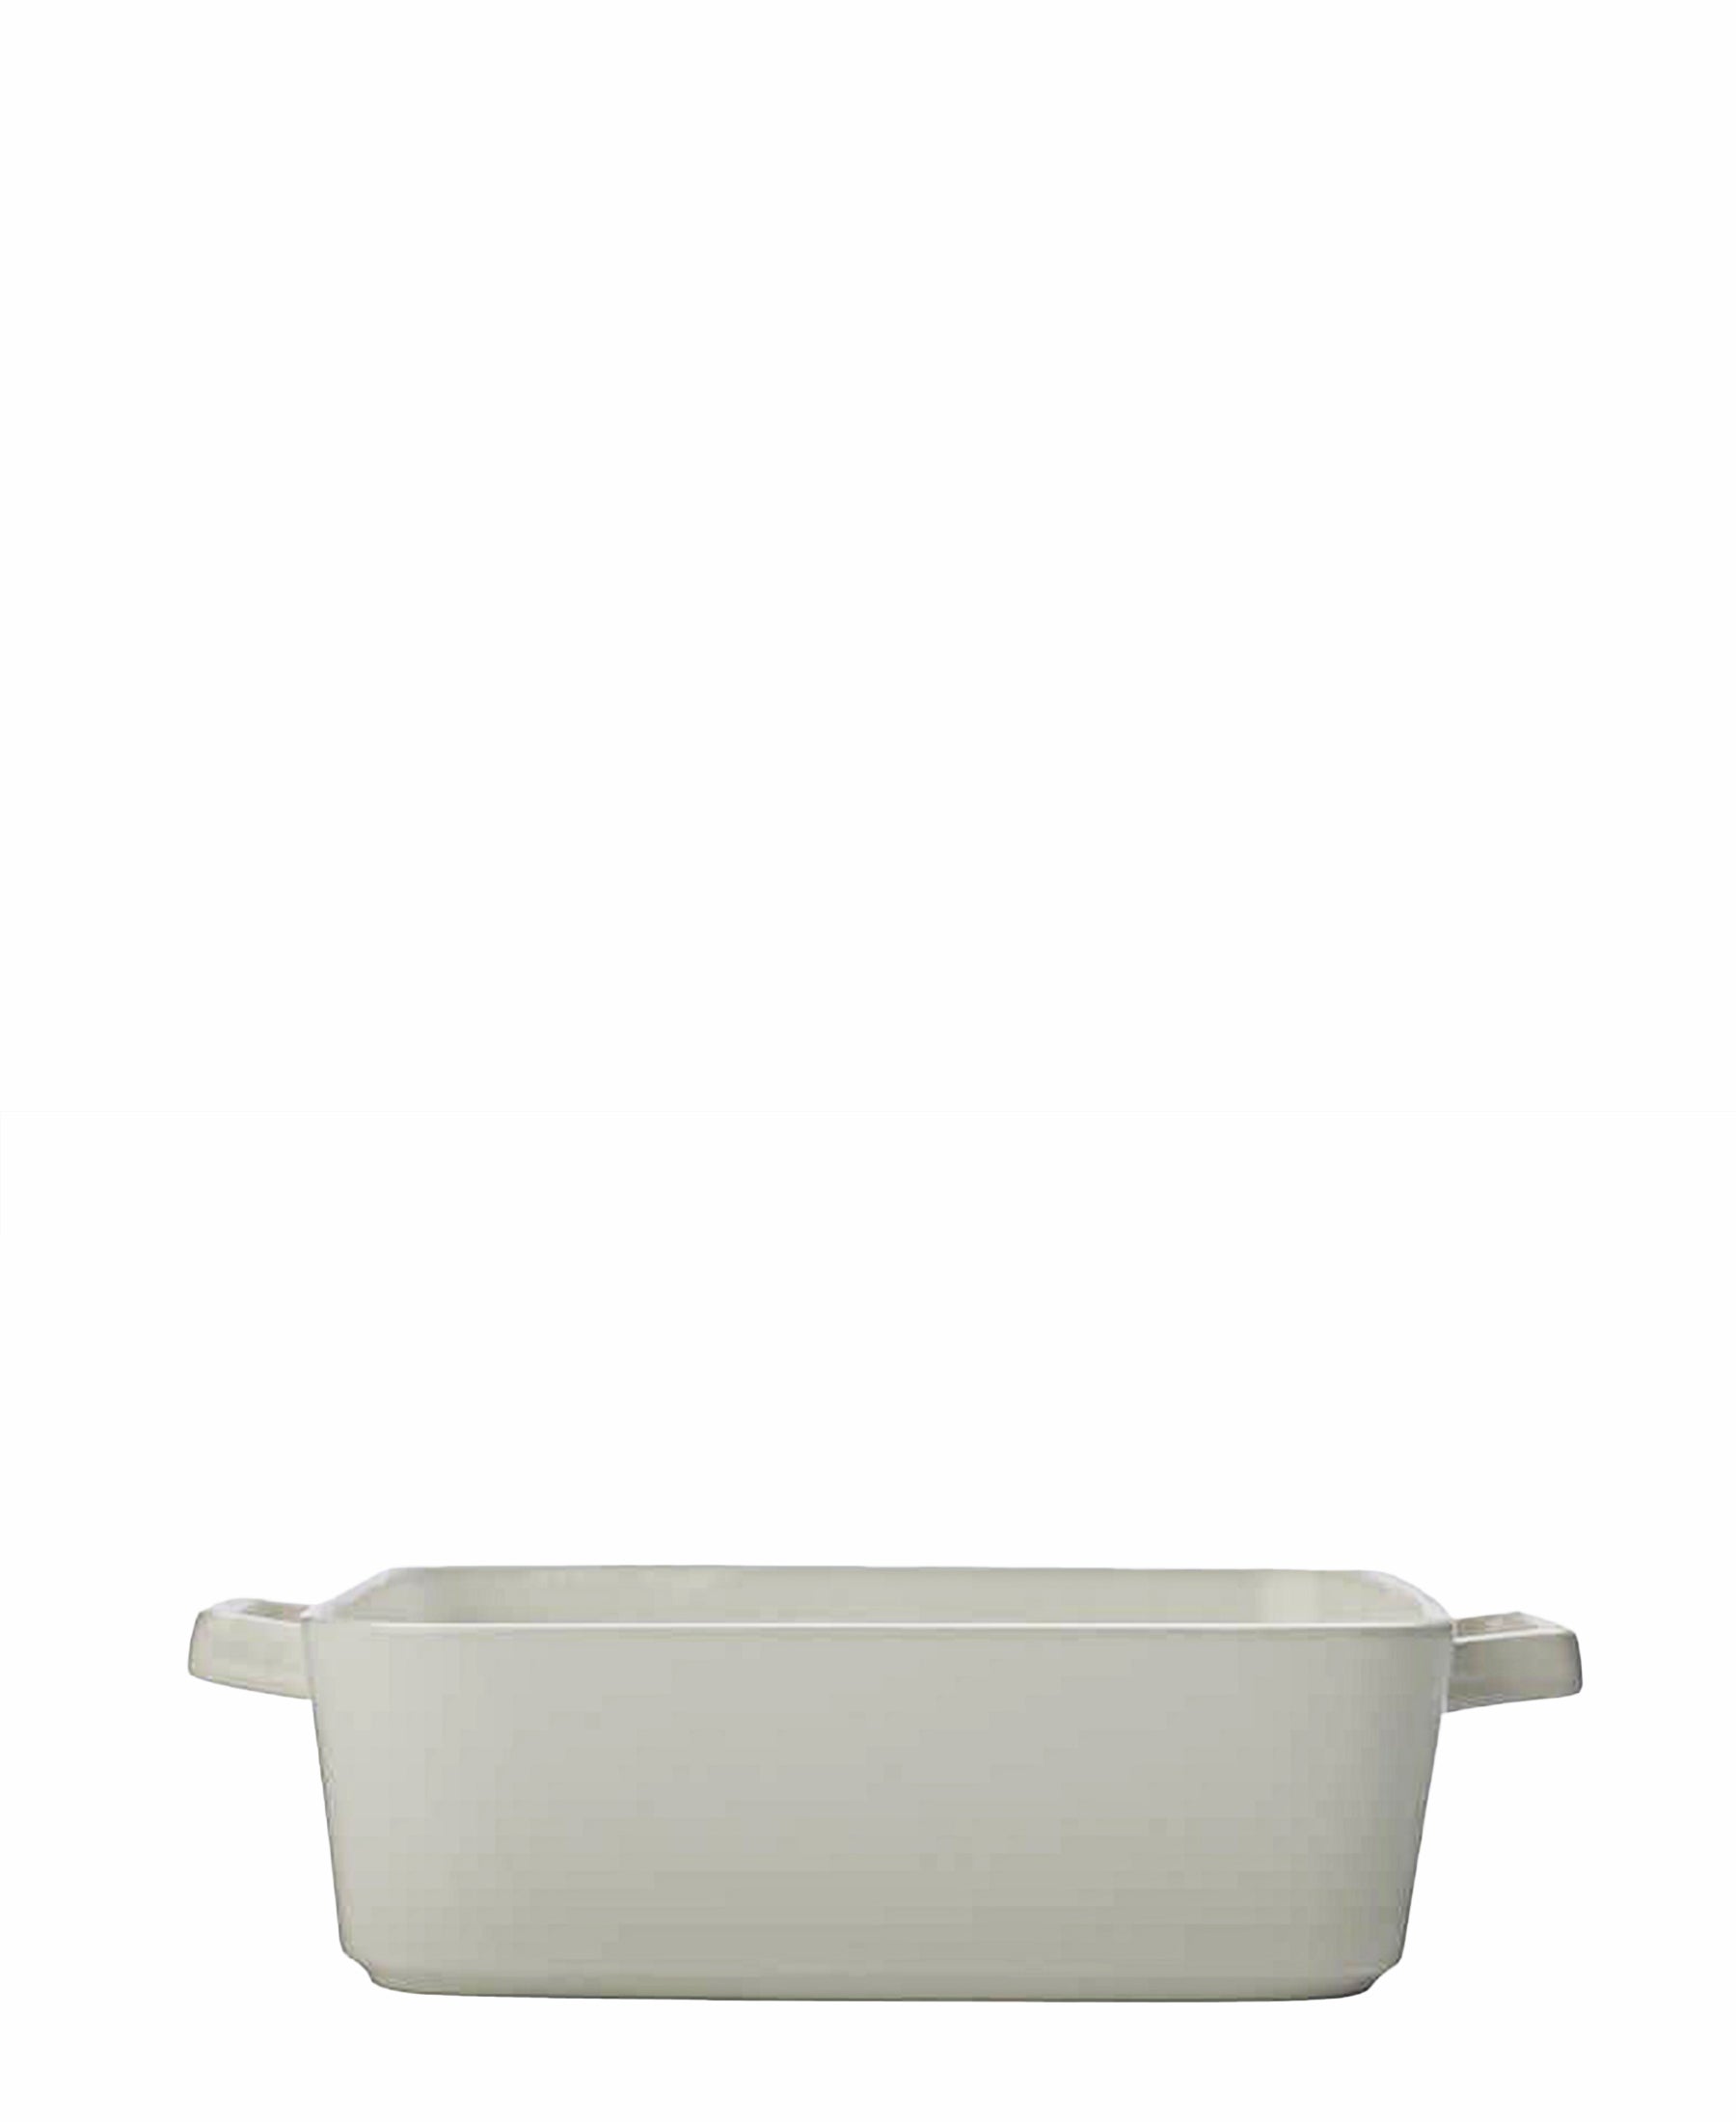 Maxwell & Williams Epicurious Square Baker 19CM - White